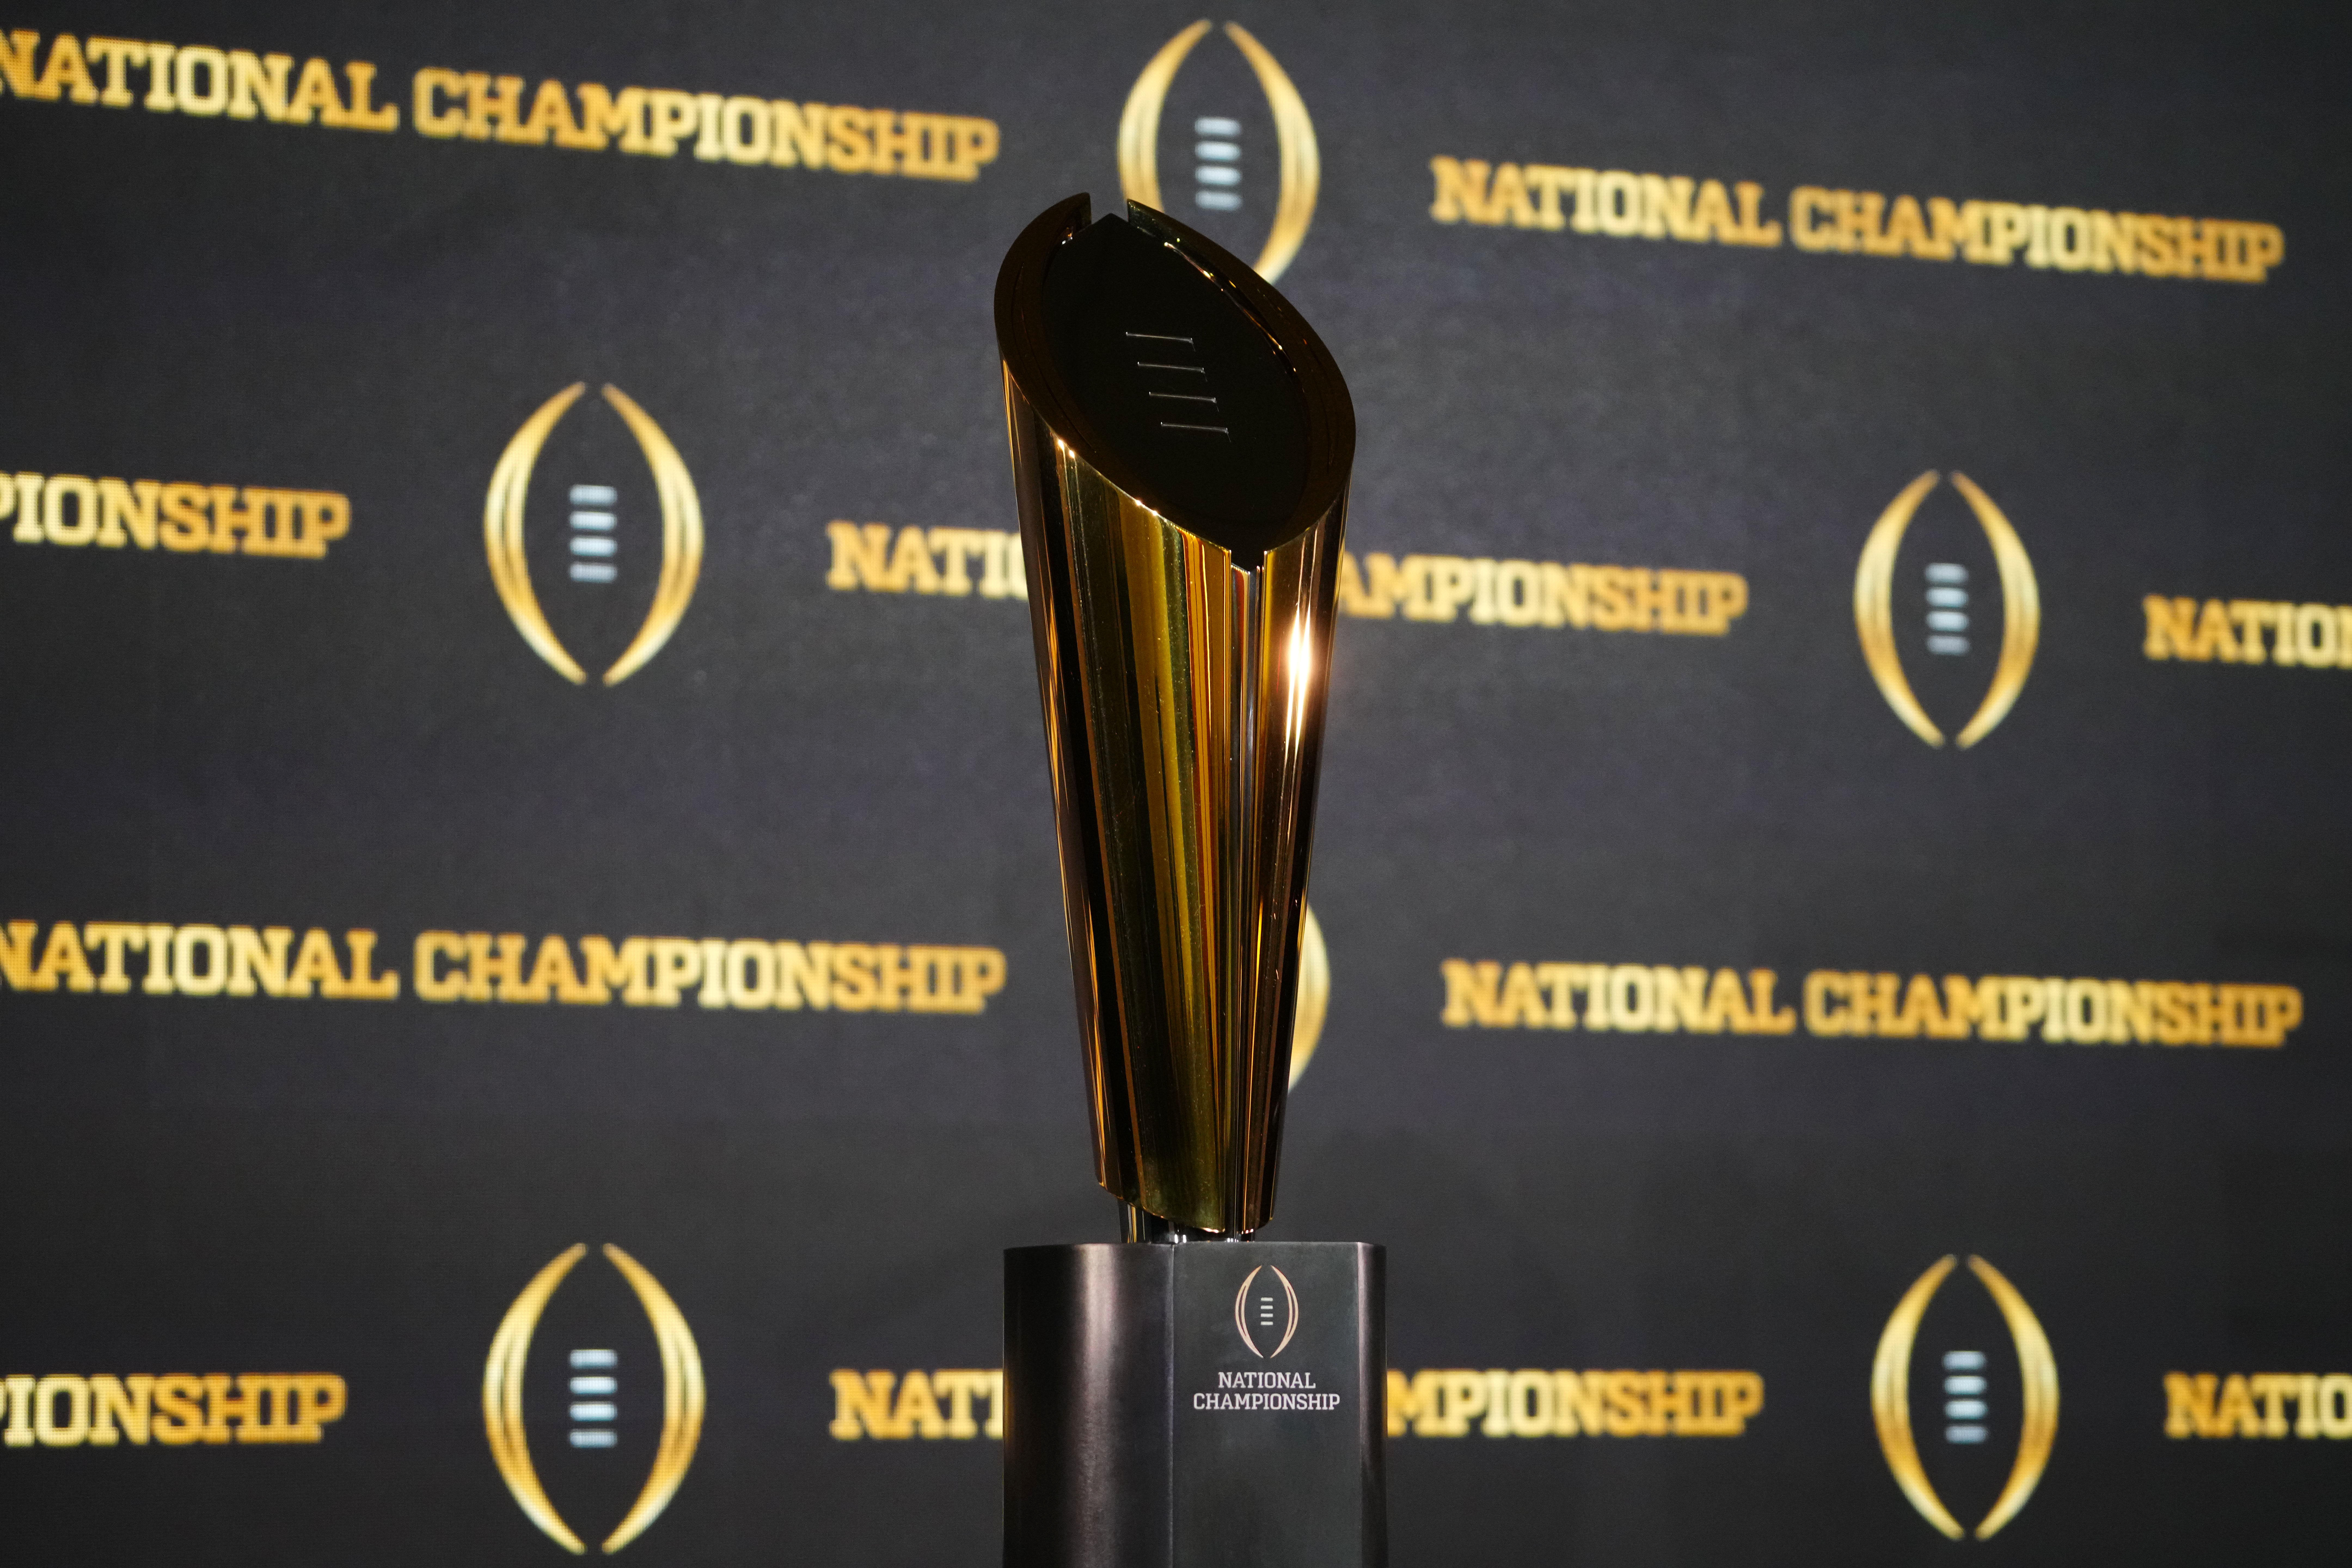 NCAA Football: CFP National Championship Head Coaches News Conference